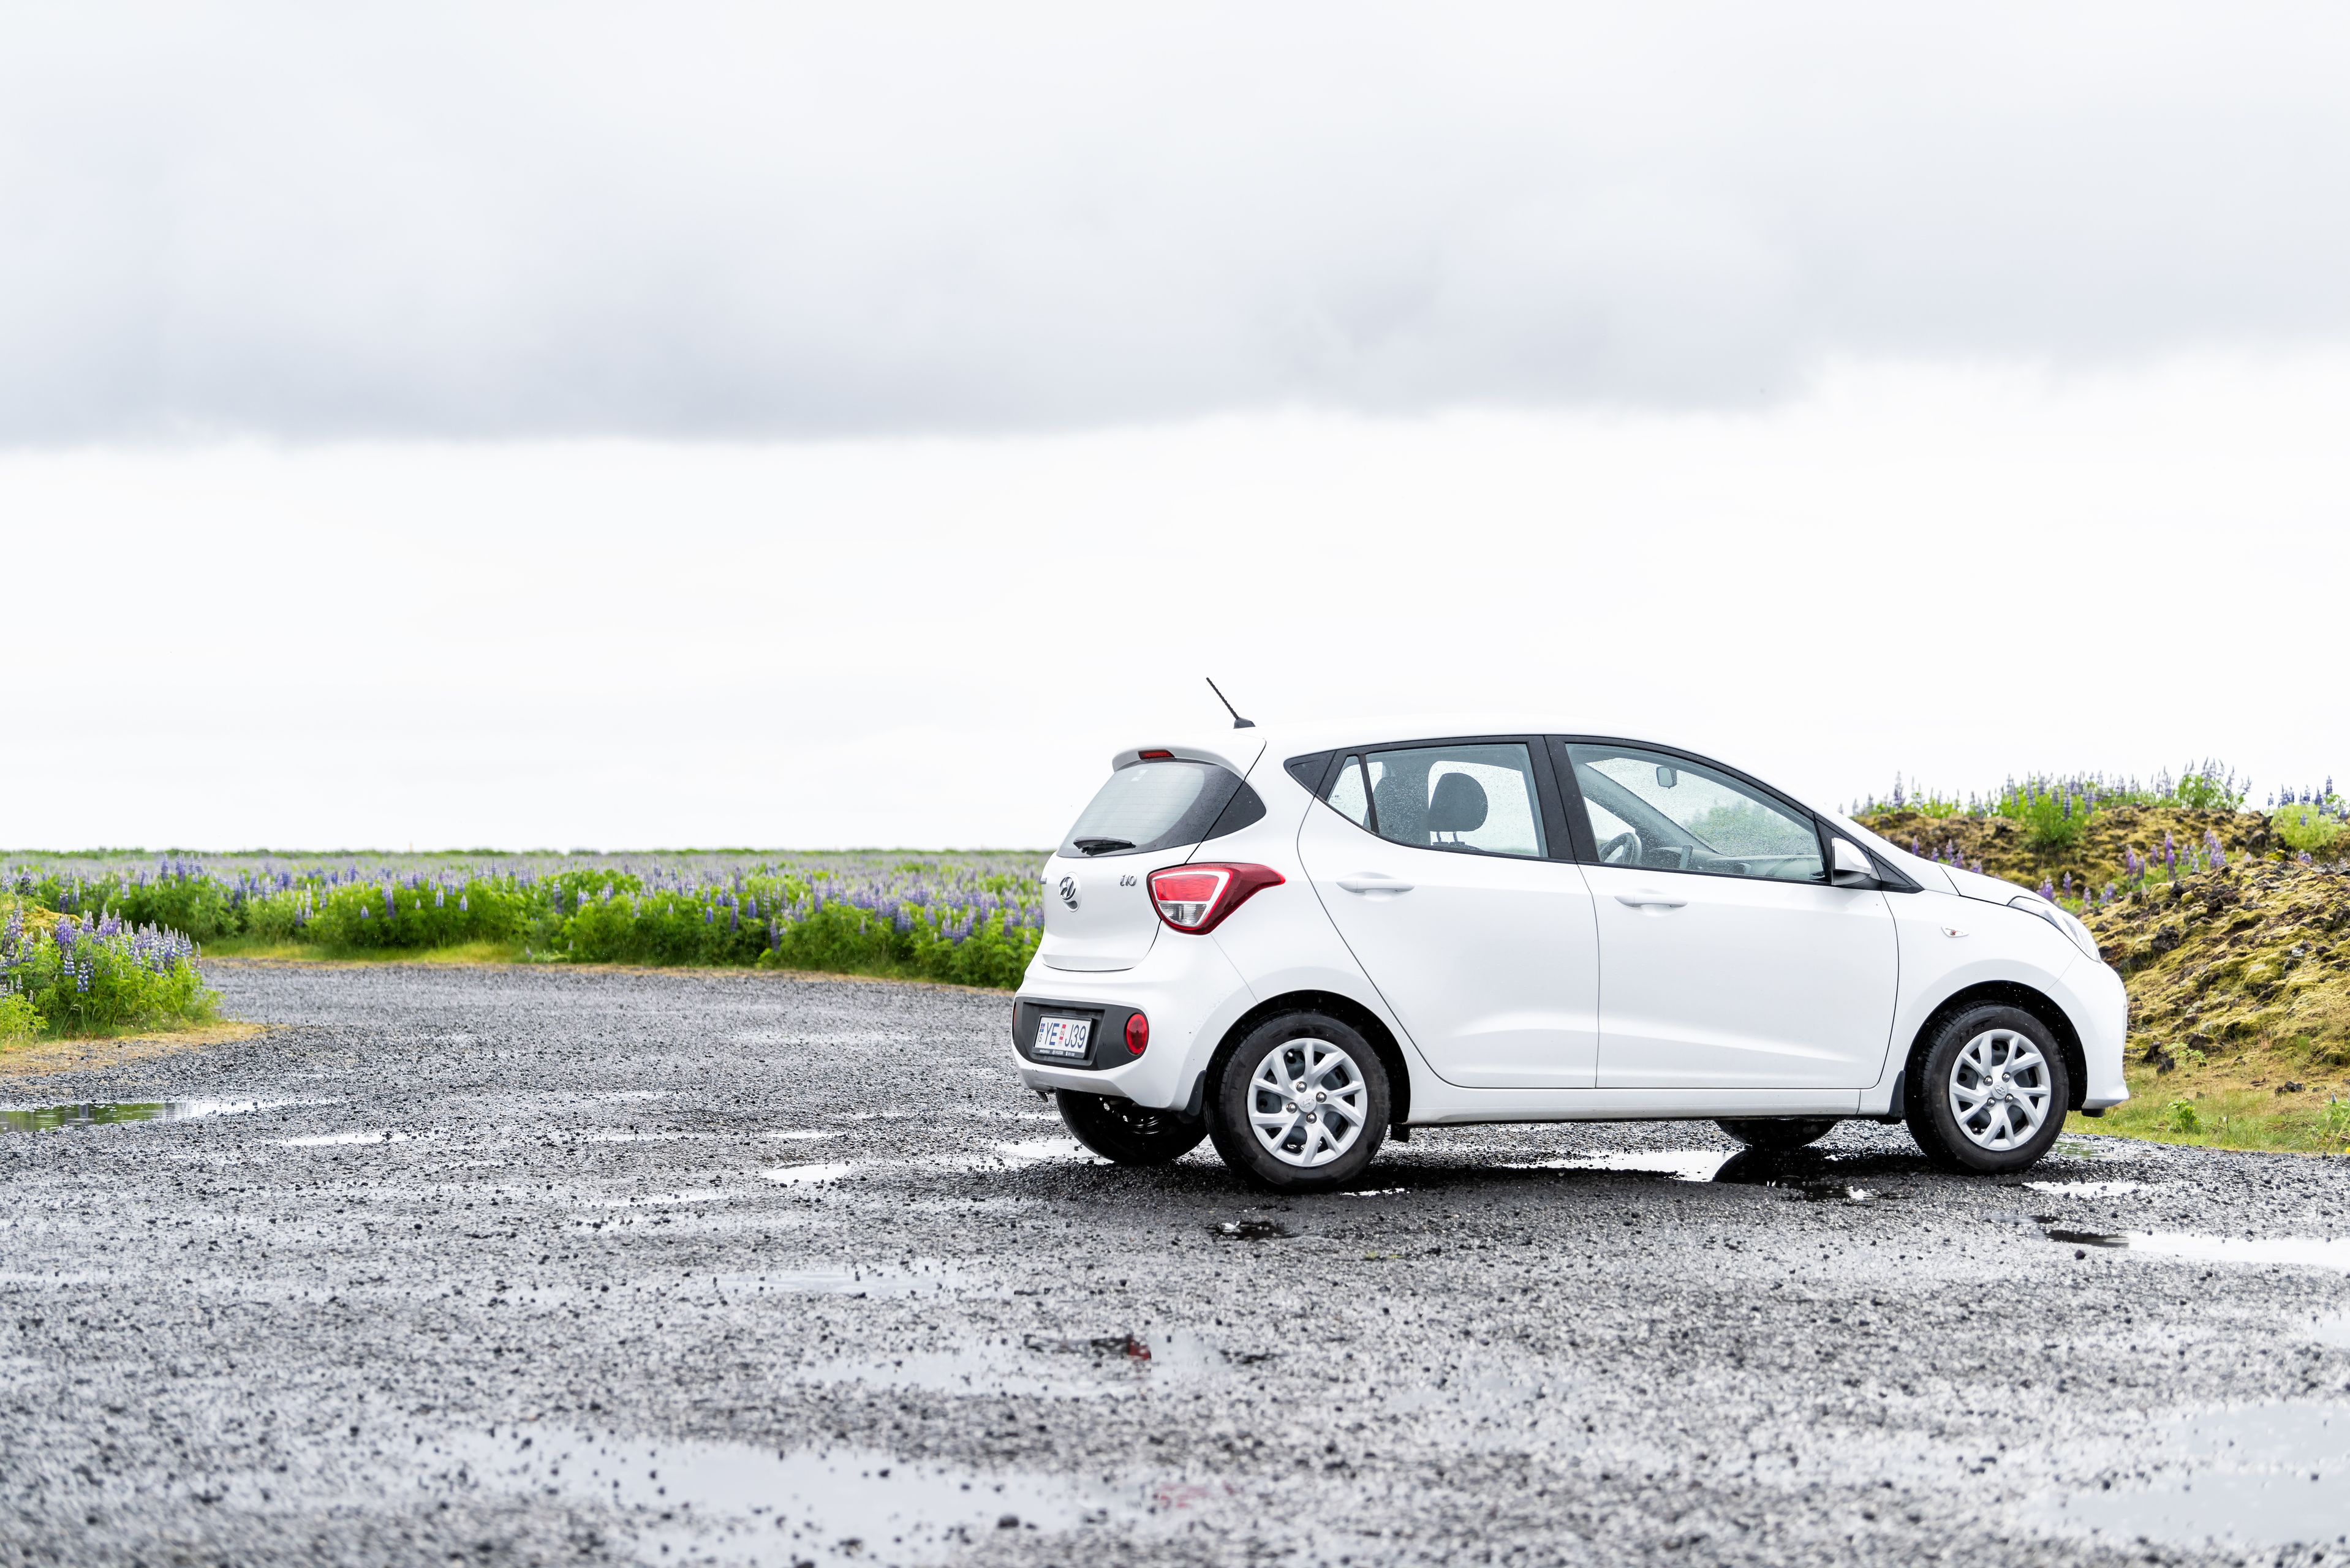 White Hyundai i10 rental car parked on a scenic Iceland route.